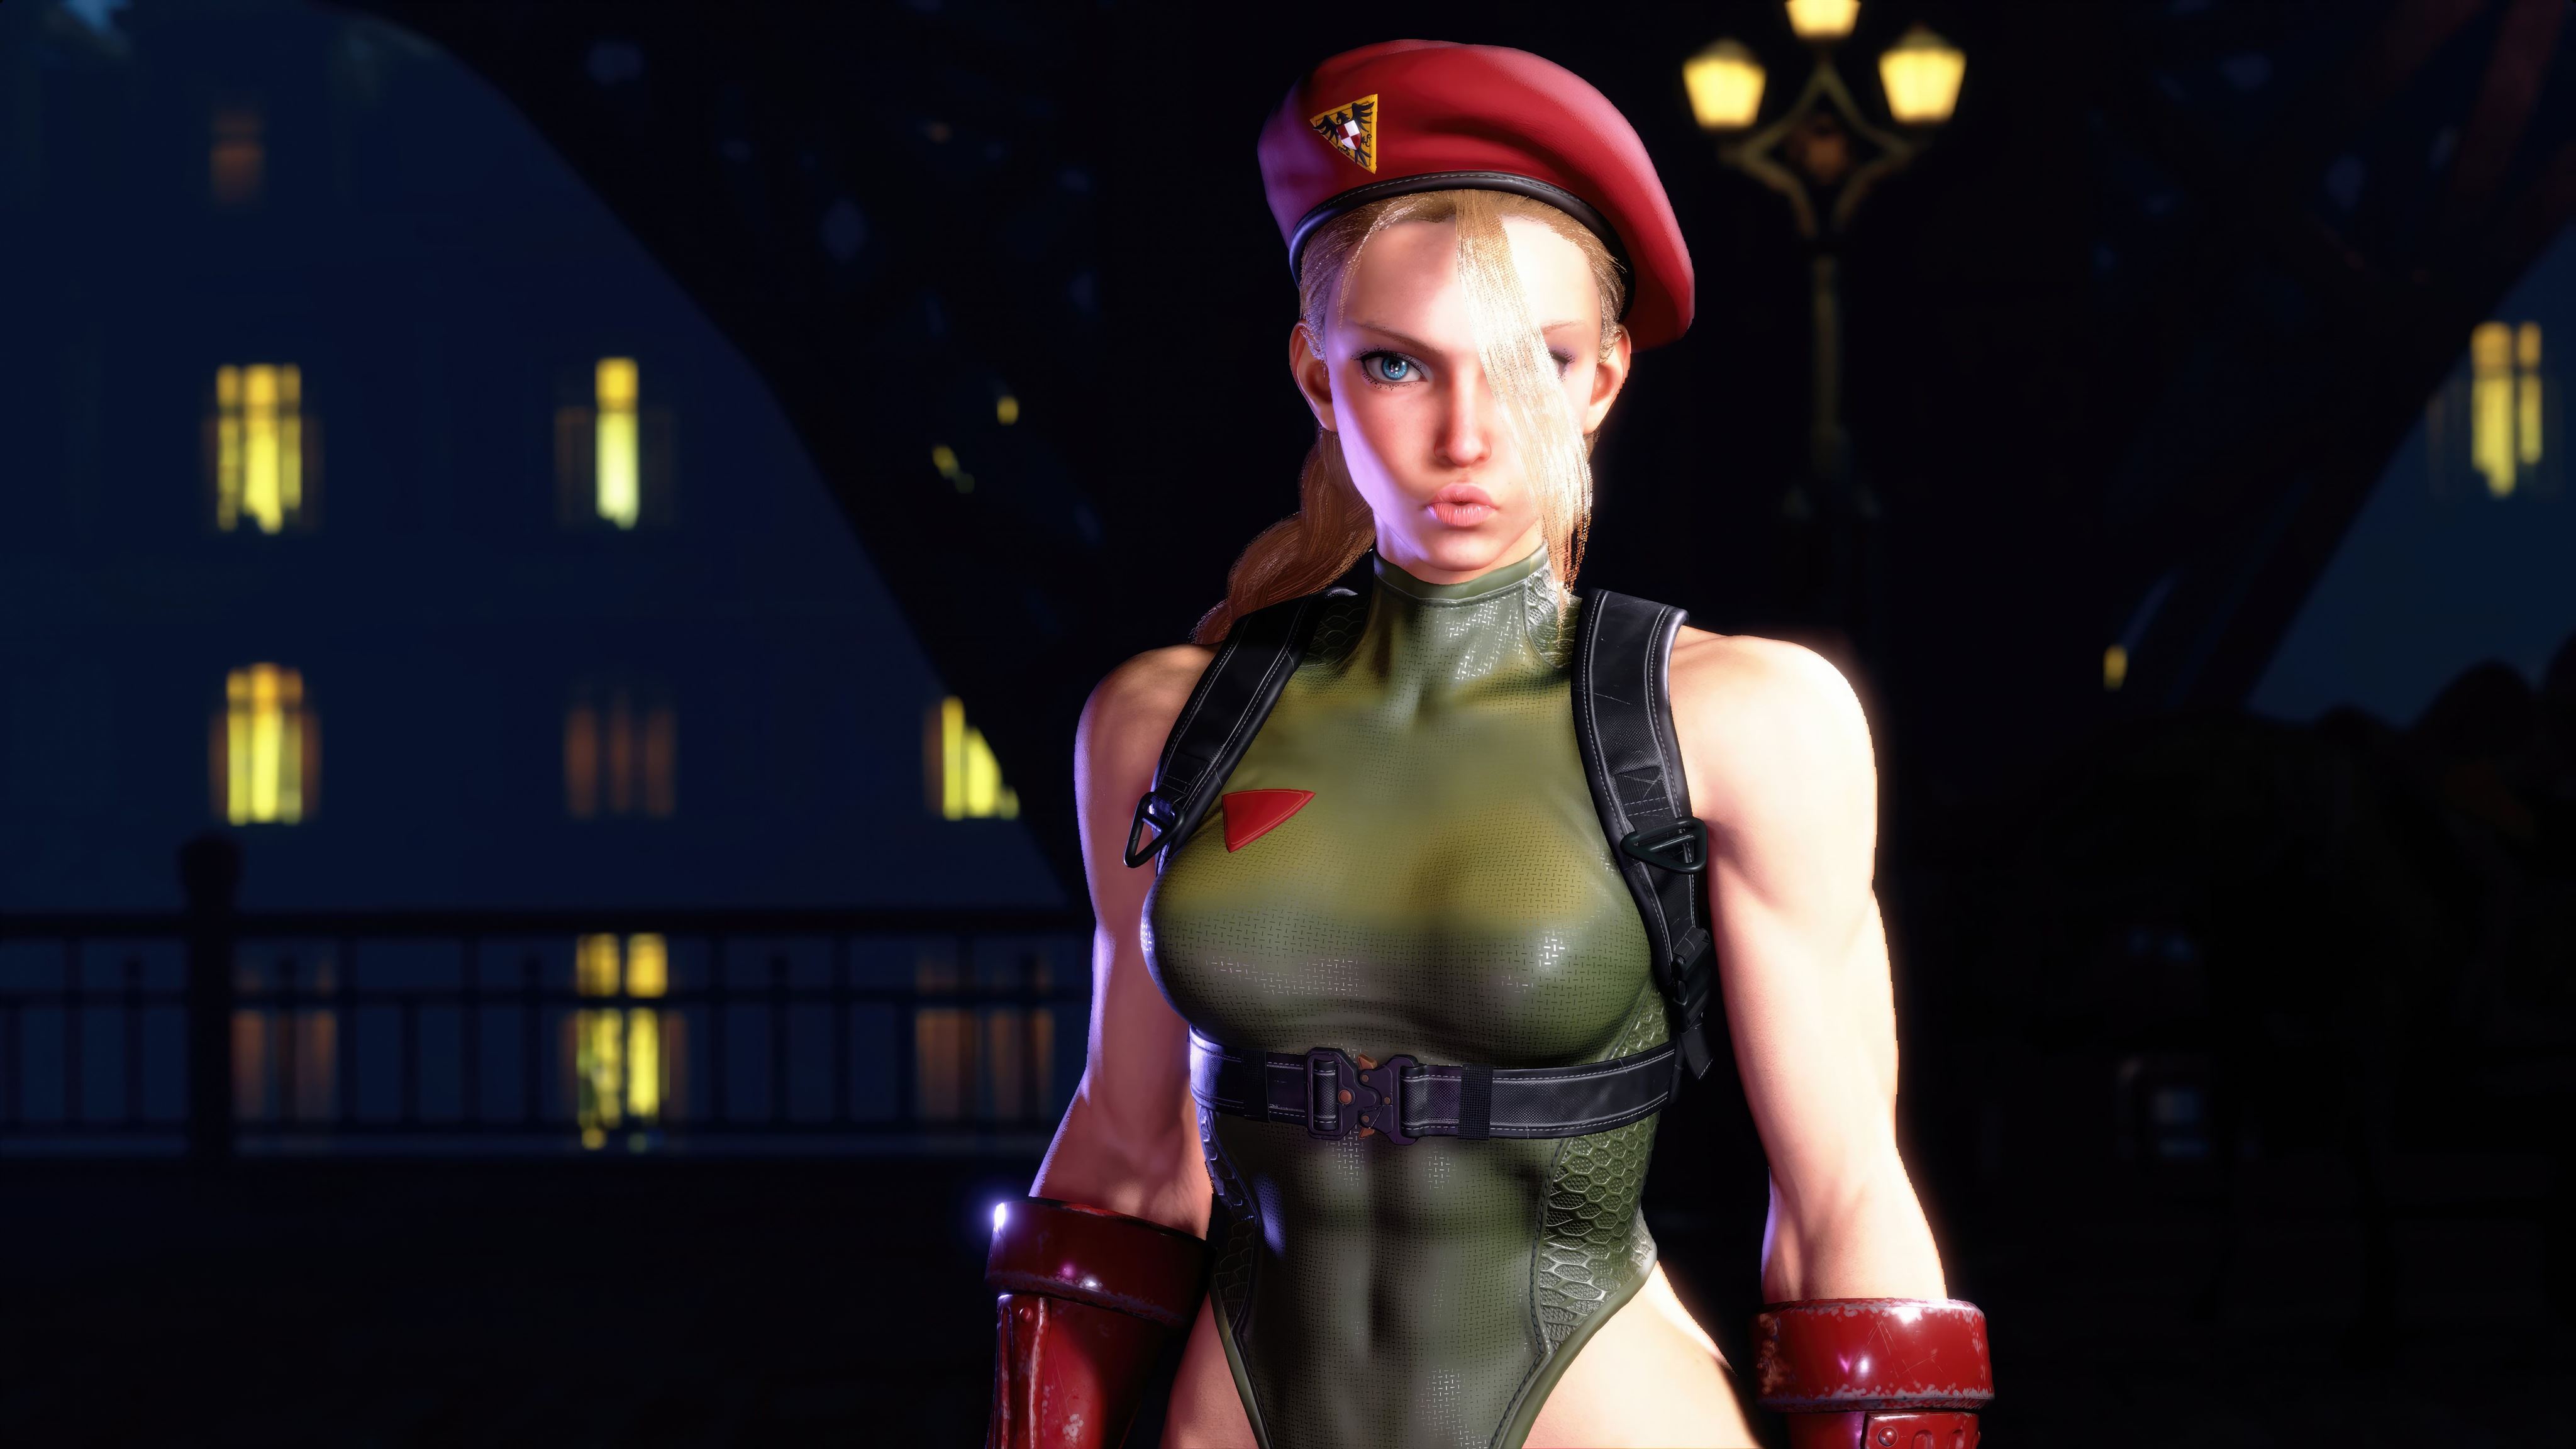 Anime Wallpapers on Twitter Cammy Street Fighter 6 2250x4000 Post  httpstcoW3NlyJNuoS wallpaper anime animewallpaper  httpstco701qtXDUqN  Twitter